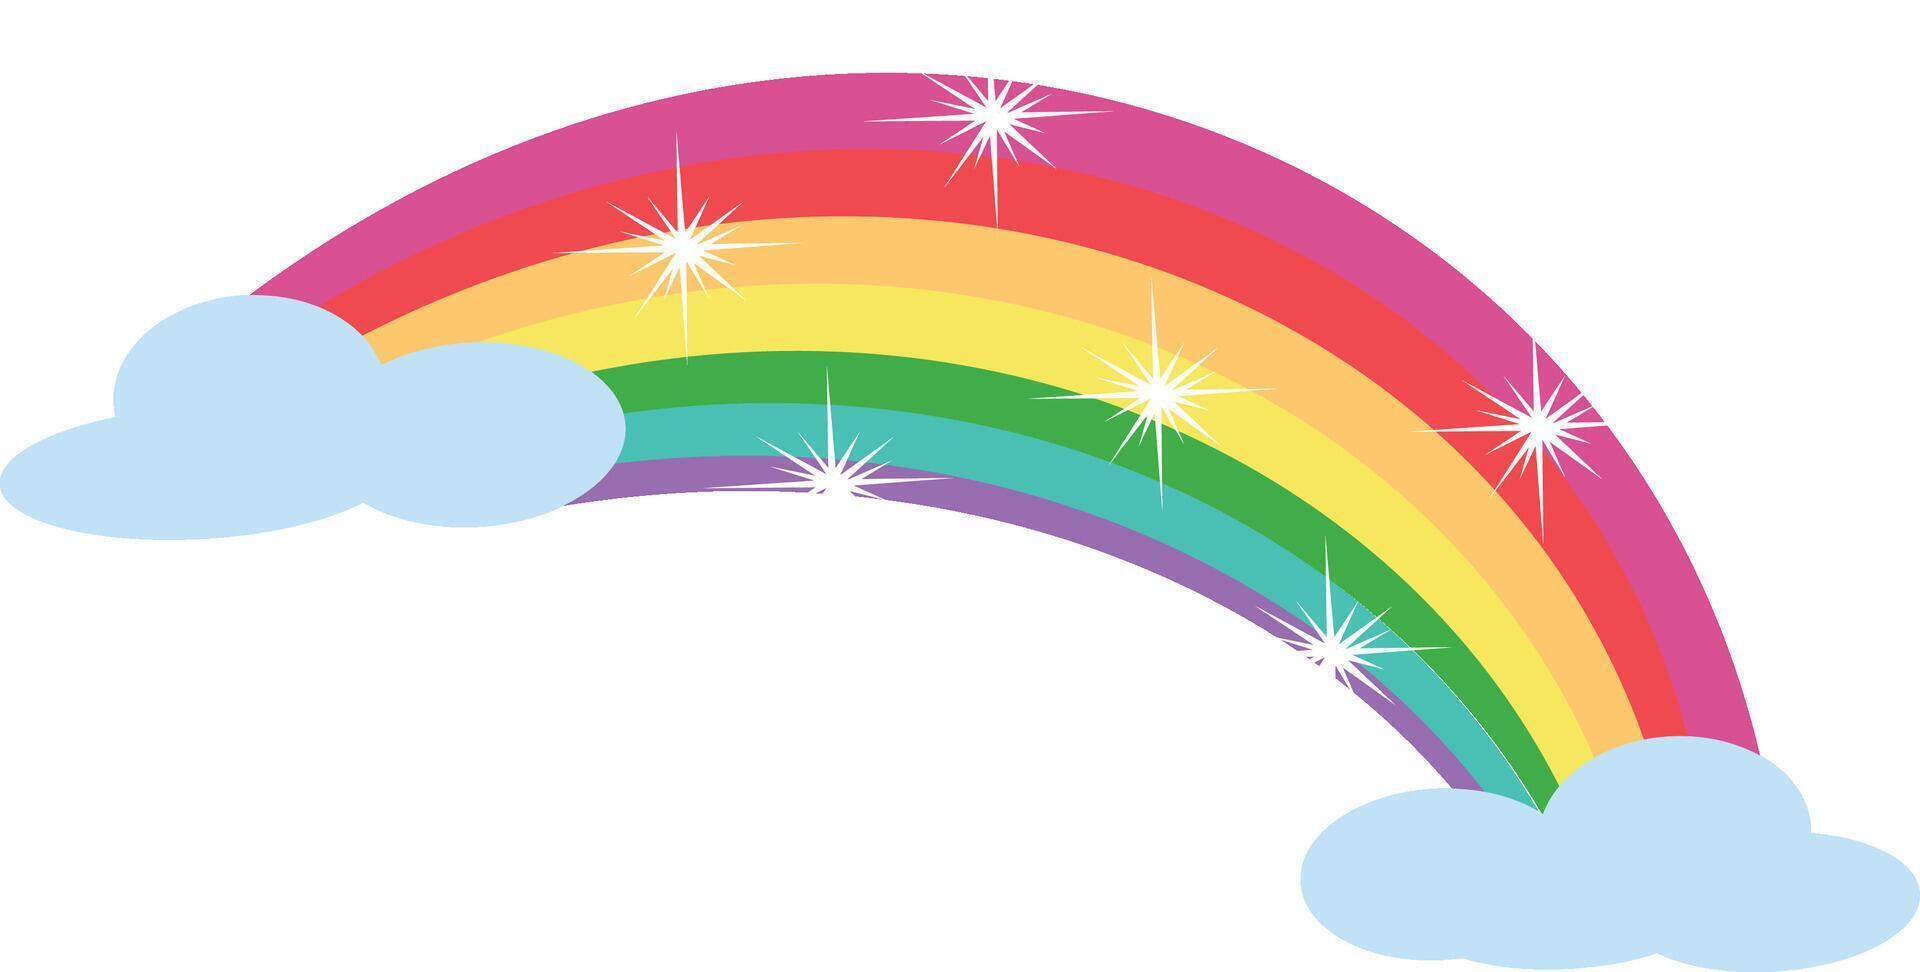 Magic rainbow with clouds and stars vector